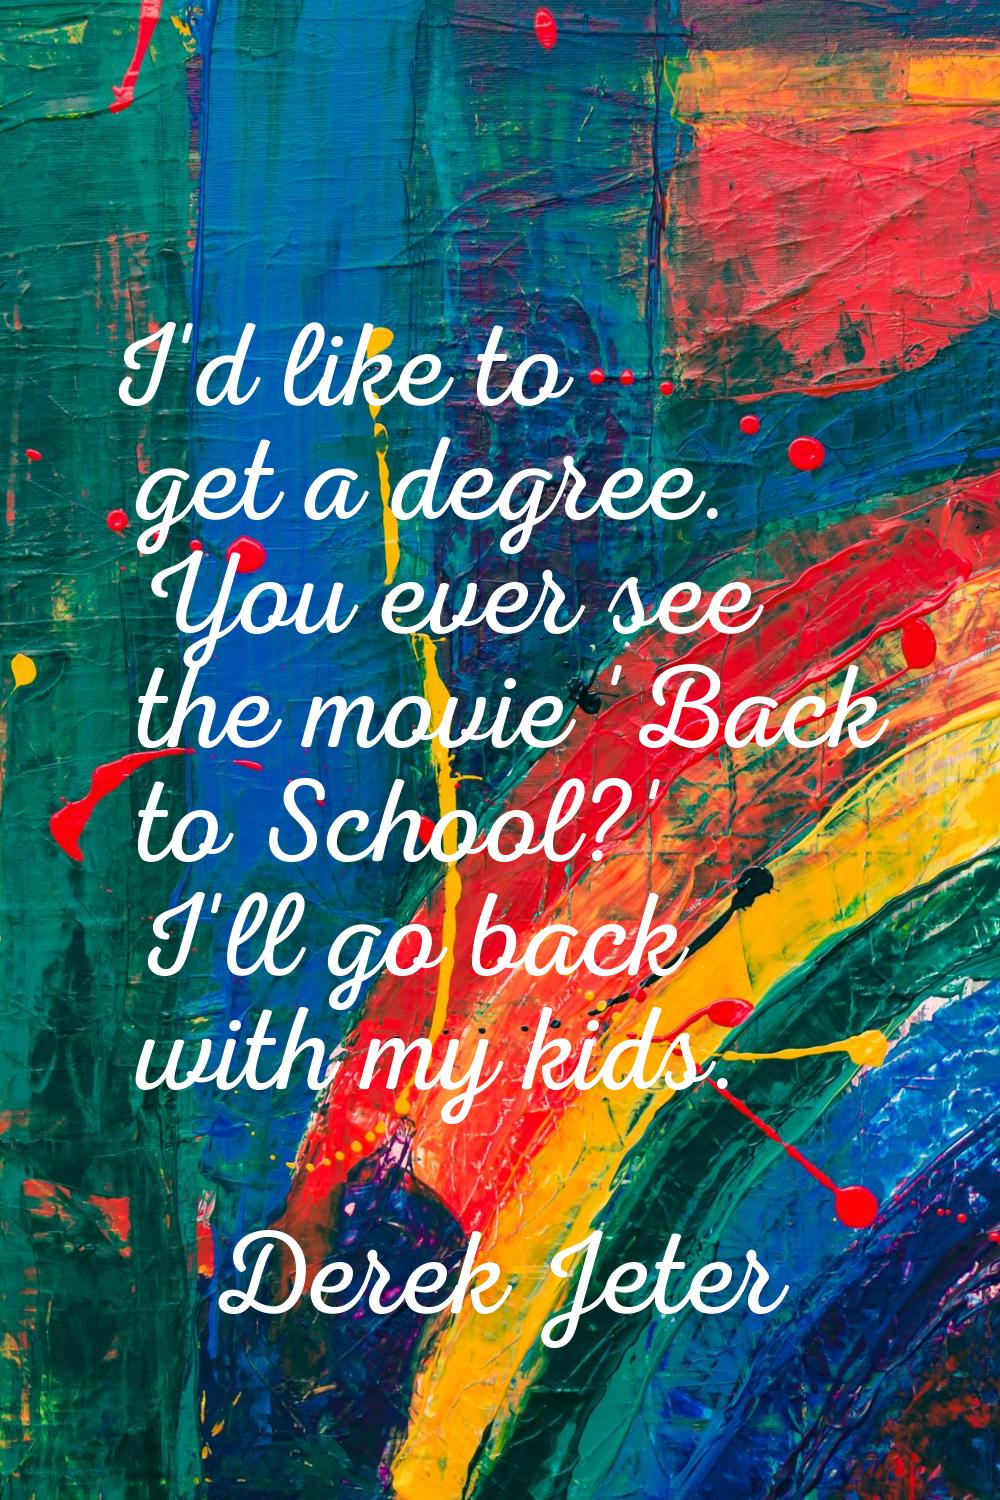 I'd like to get a degree. You ever see the movie 'Back to School?' I'll go back with my kids.